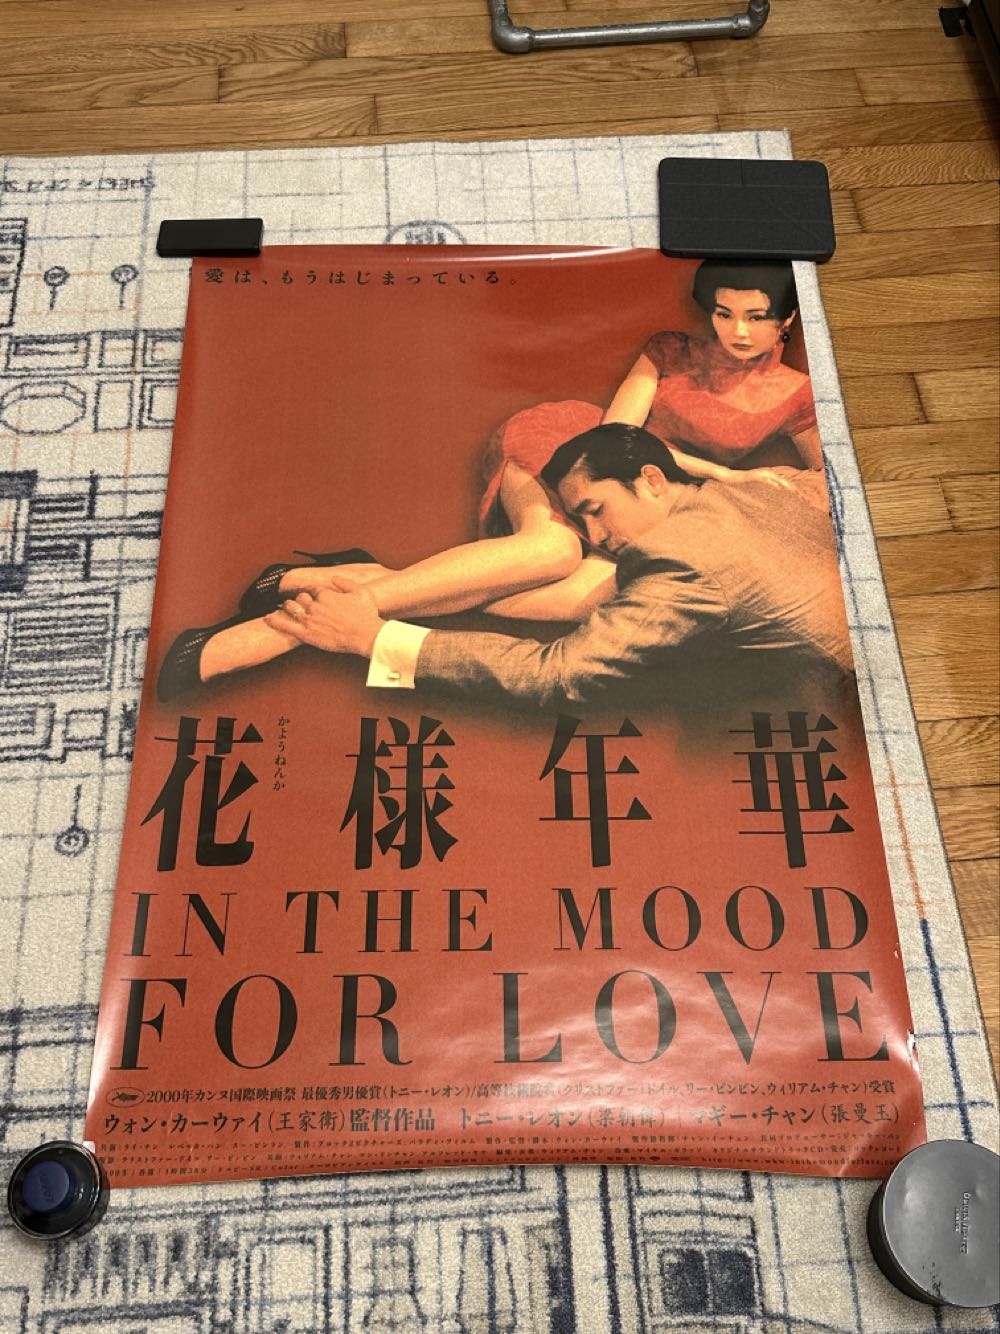 WKW In the Mood For Love Movie Poster - WKW art collectible - Main Image 1